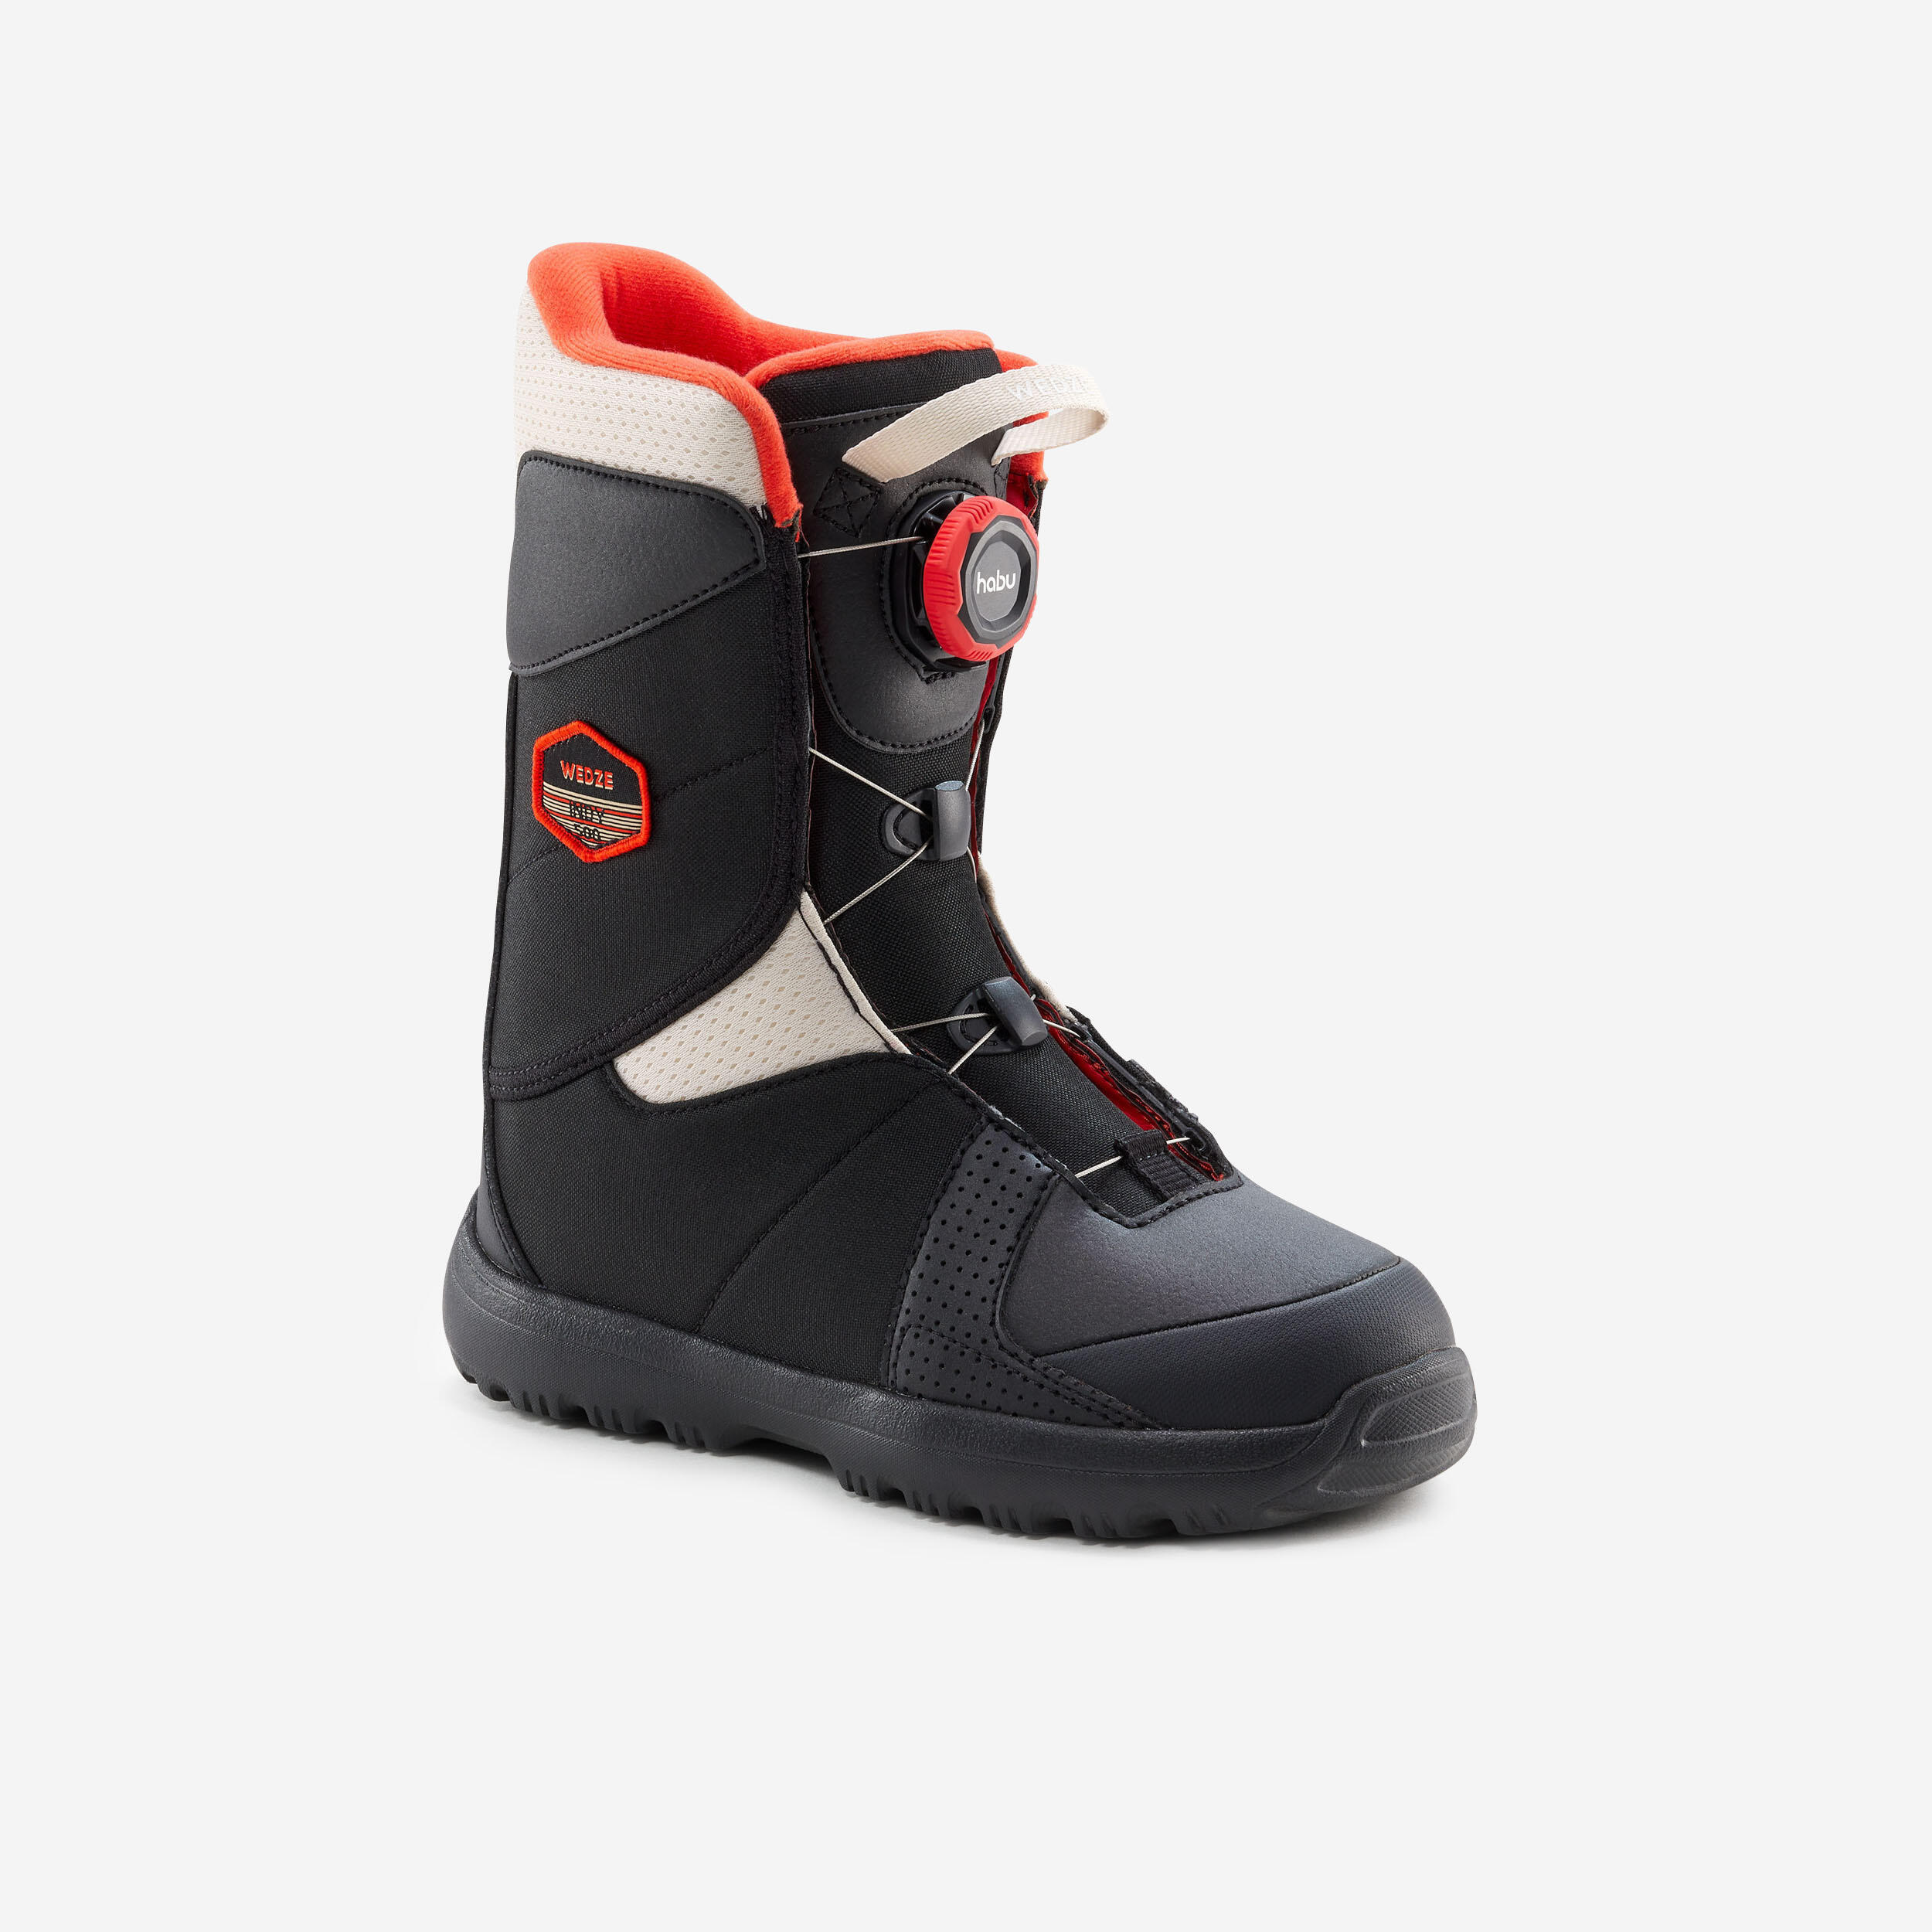 WEDZE Kids’ snowboard boots with quick release - Indy 500  JR - S - black and red